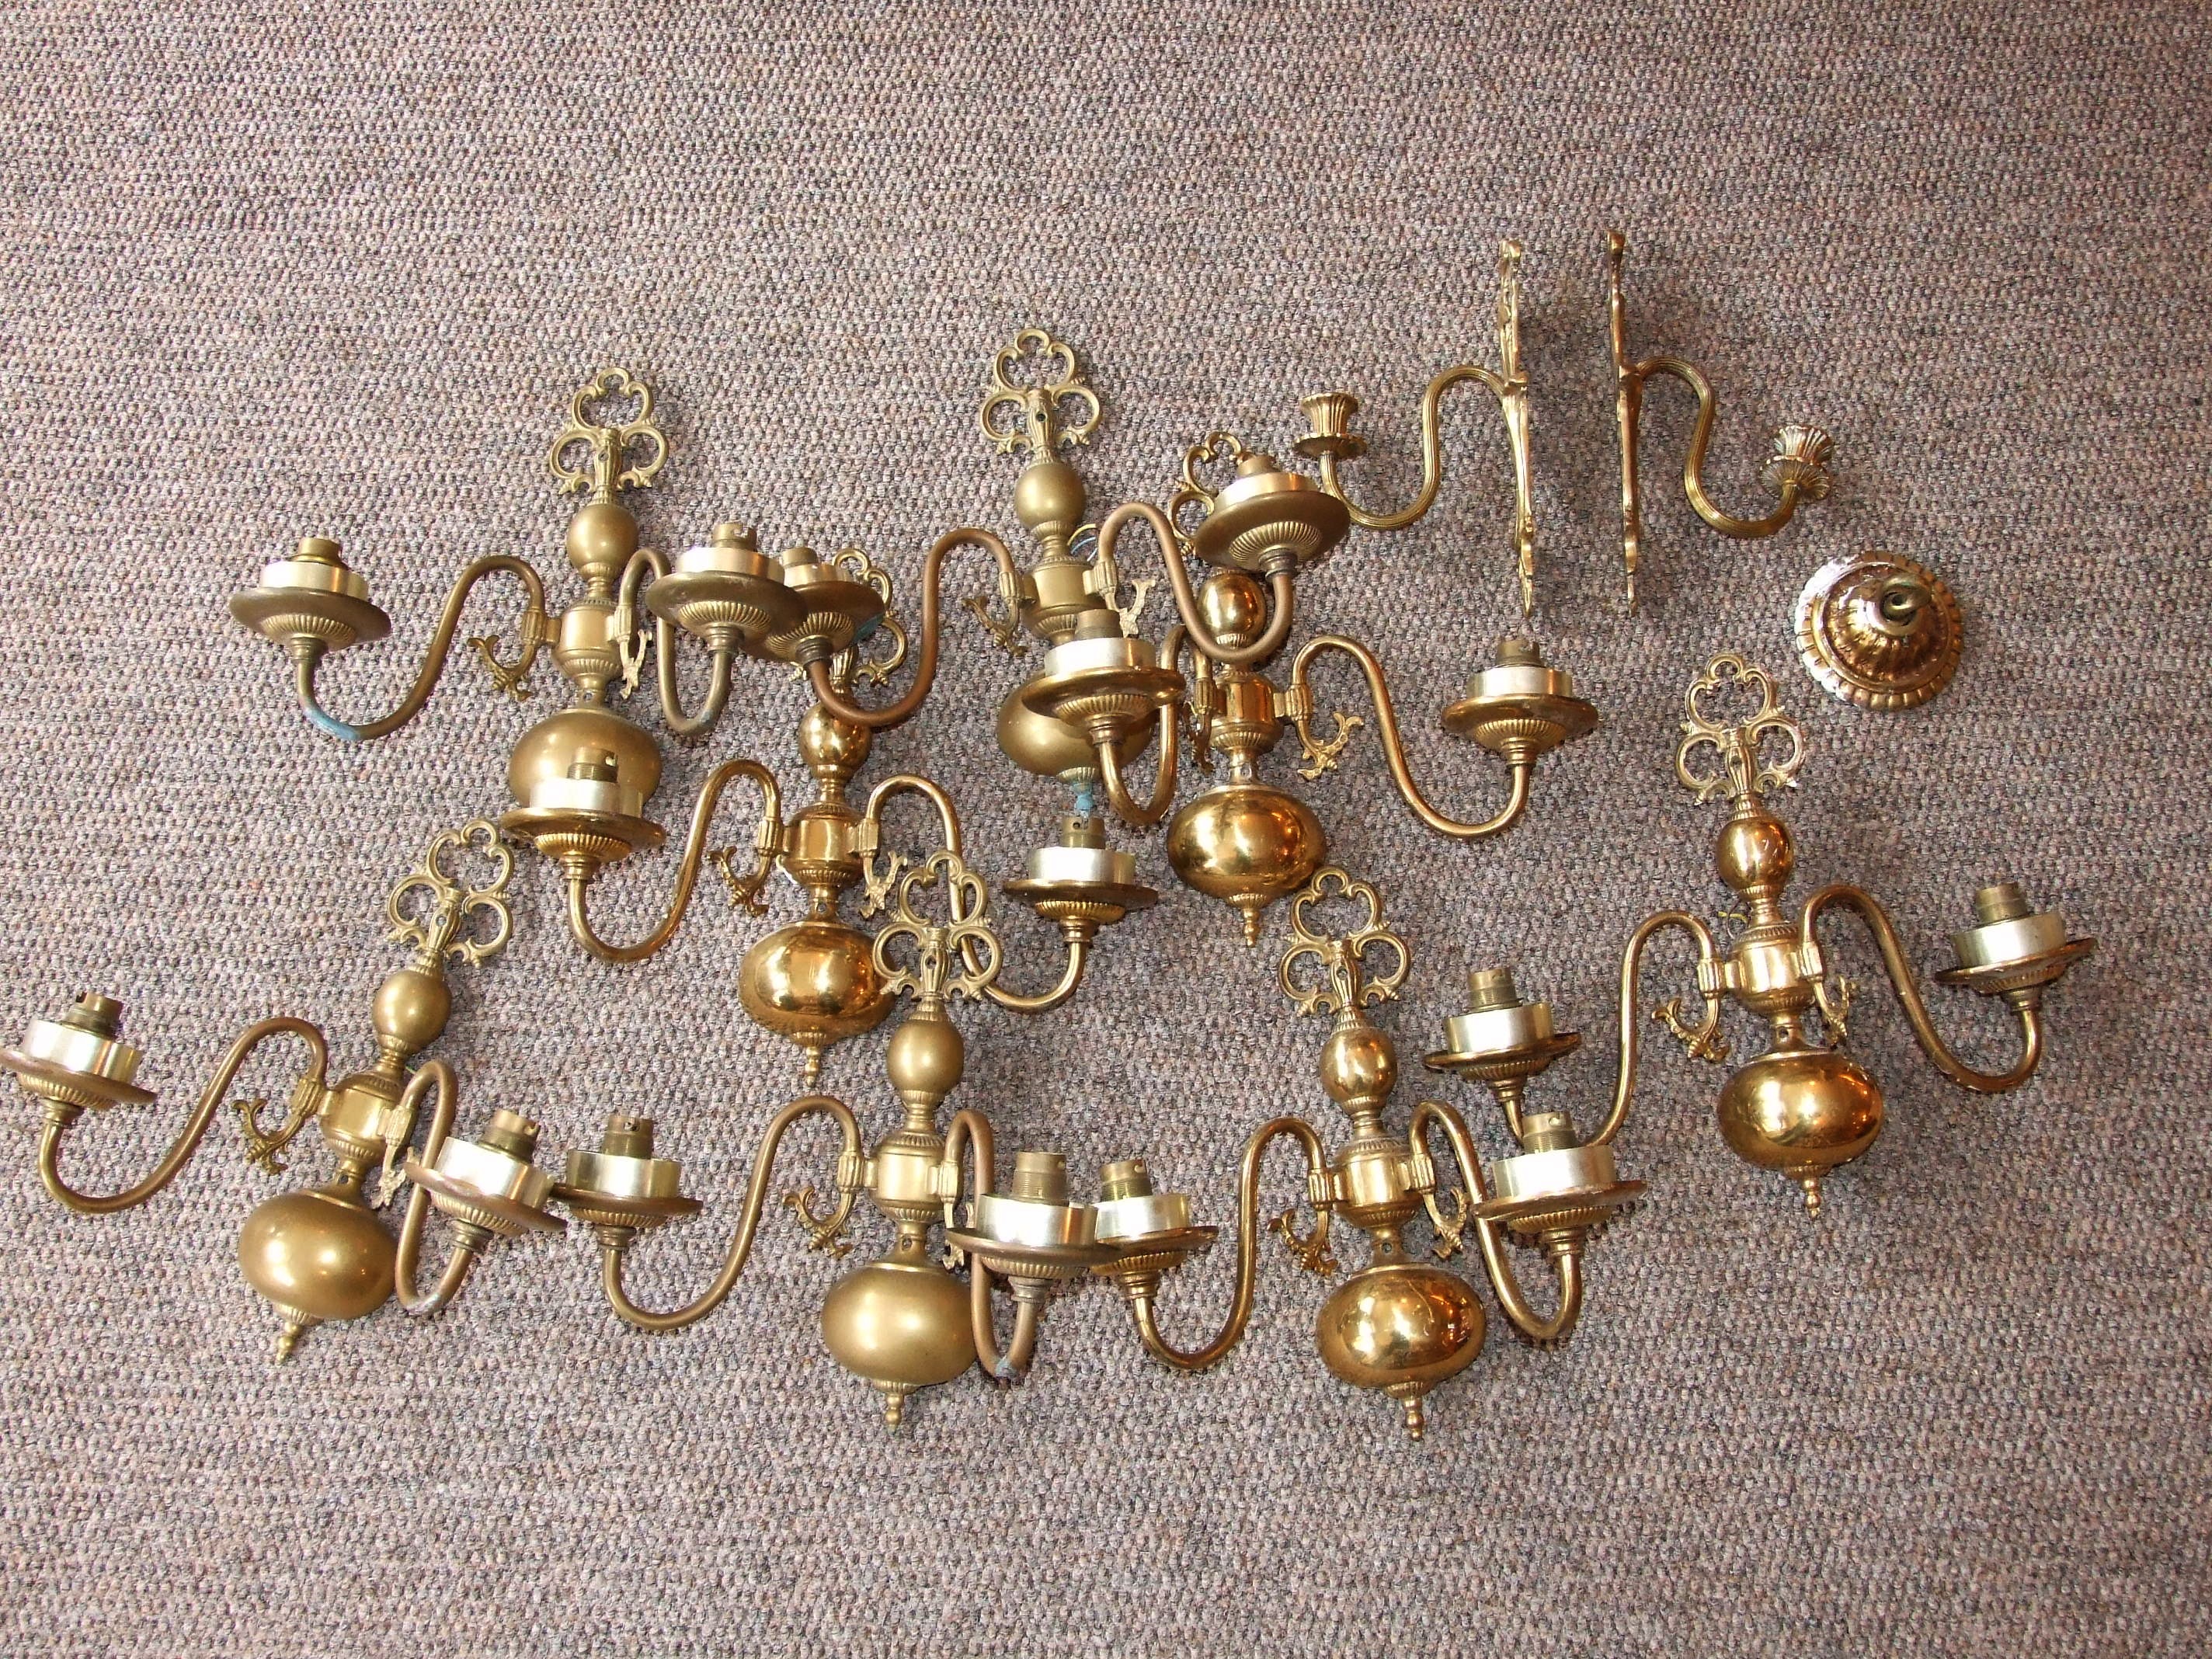 8 Brass Wall Lights and Pair of Brass Wall Sconces